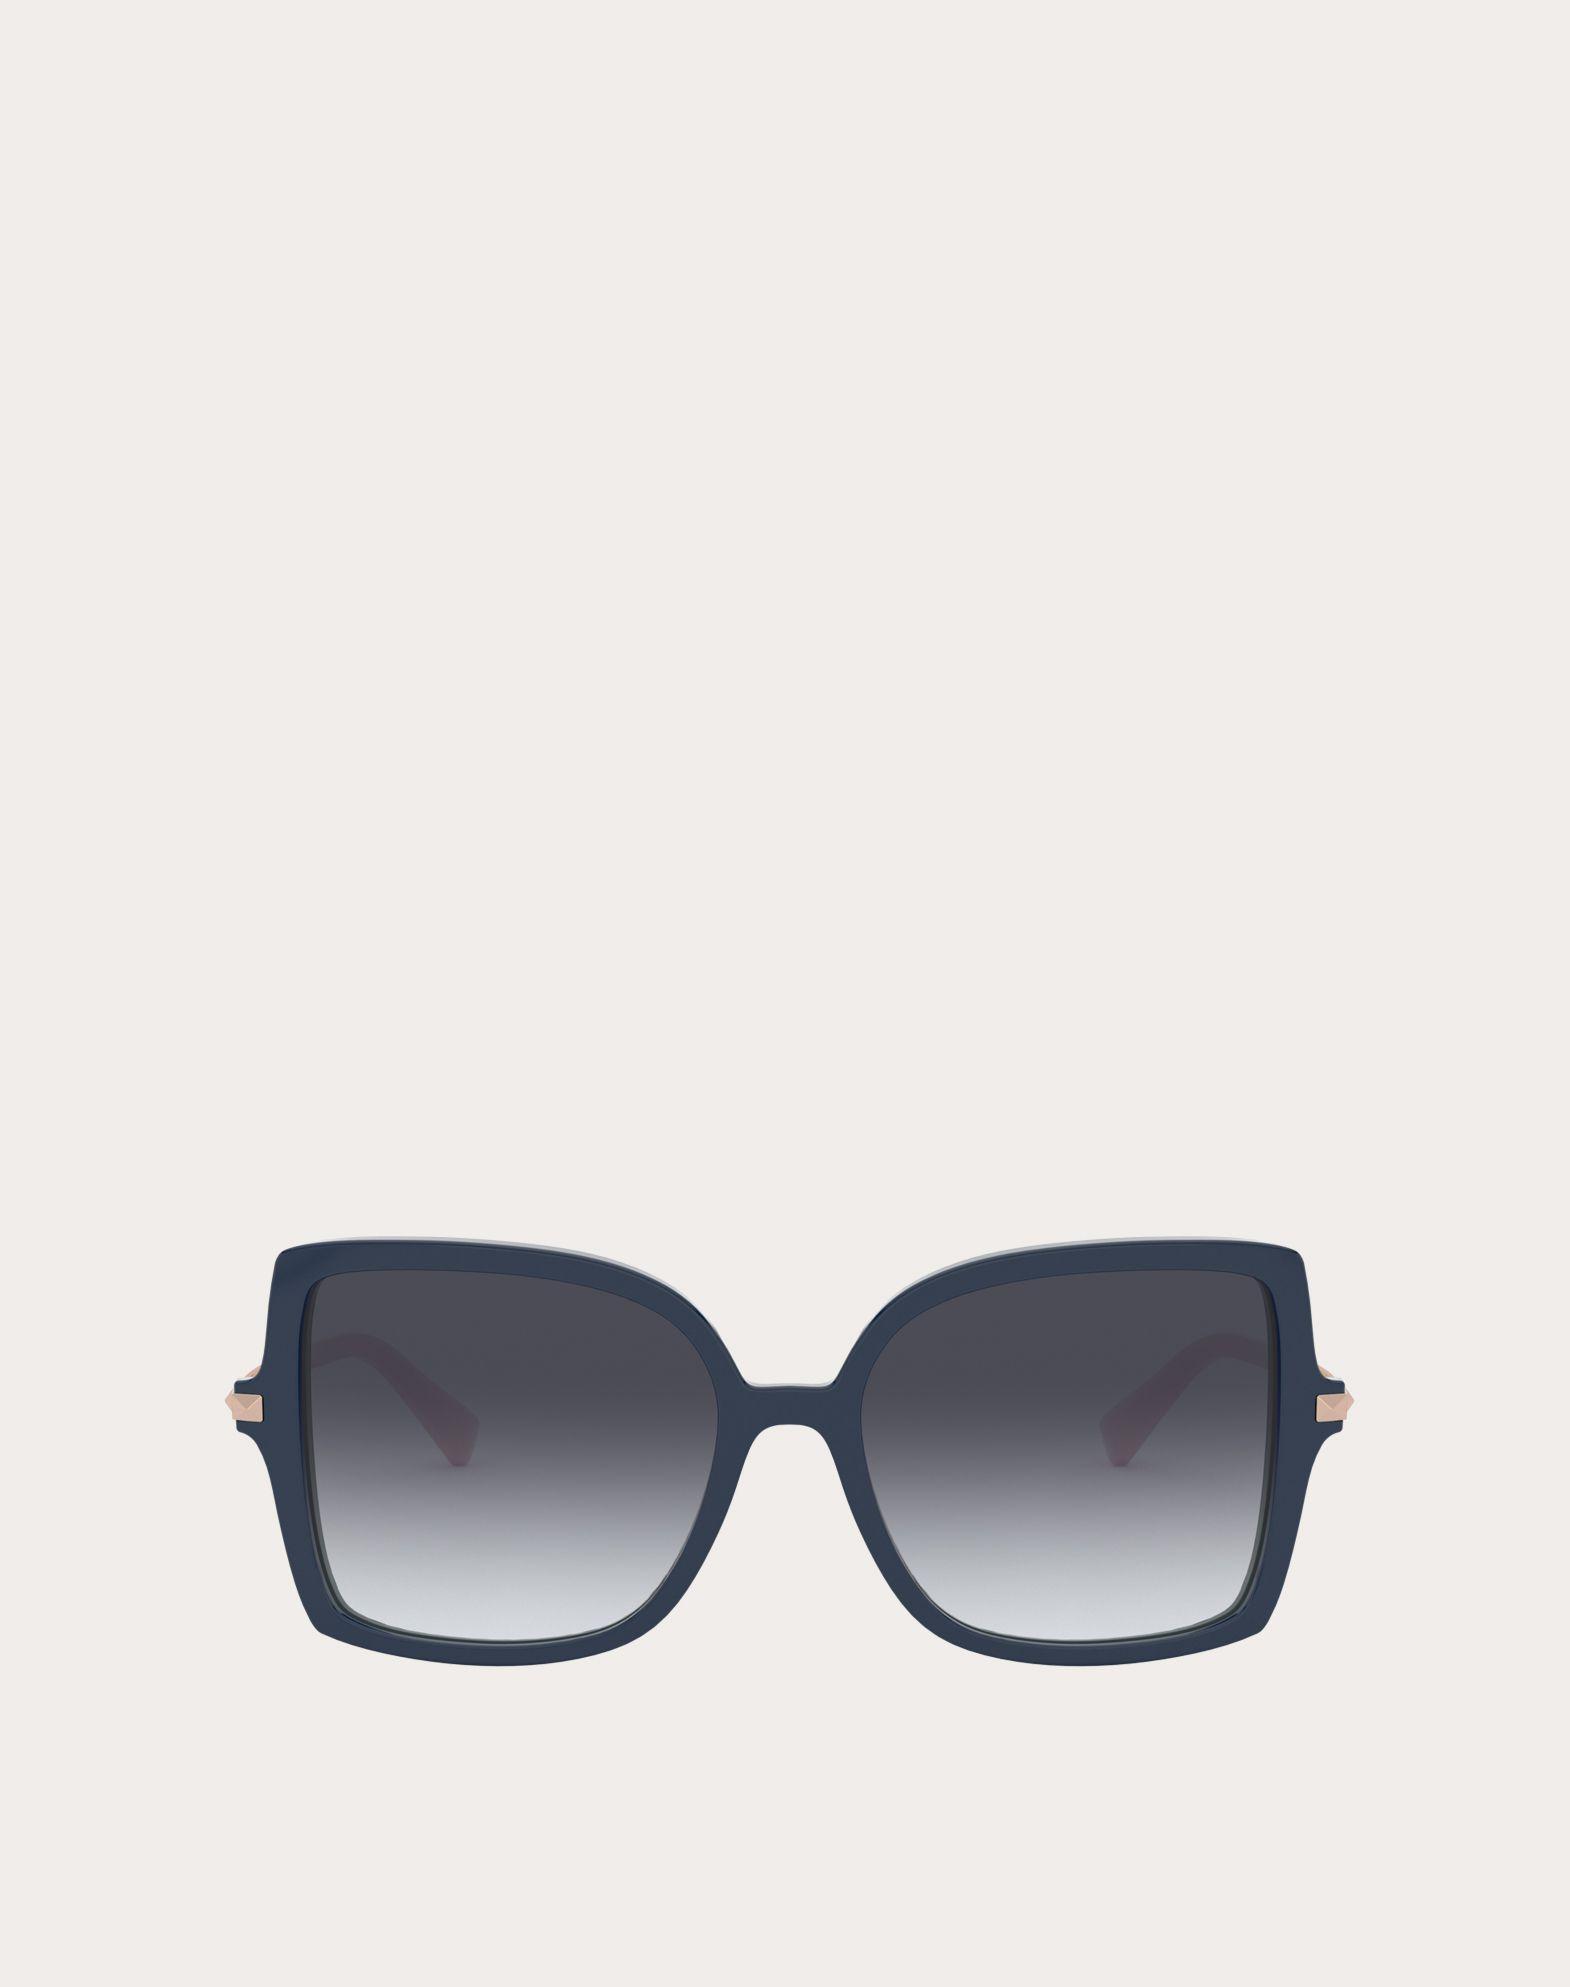 Valentino Occhiali Squared Acetate Frame With Studs in Blue - Lyst